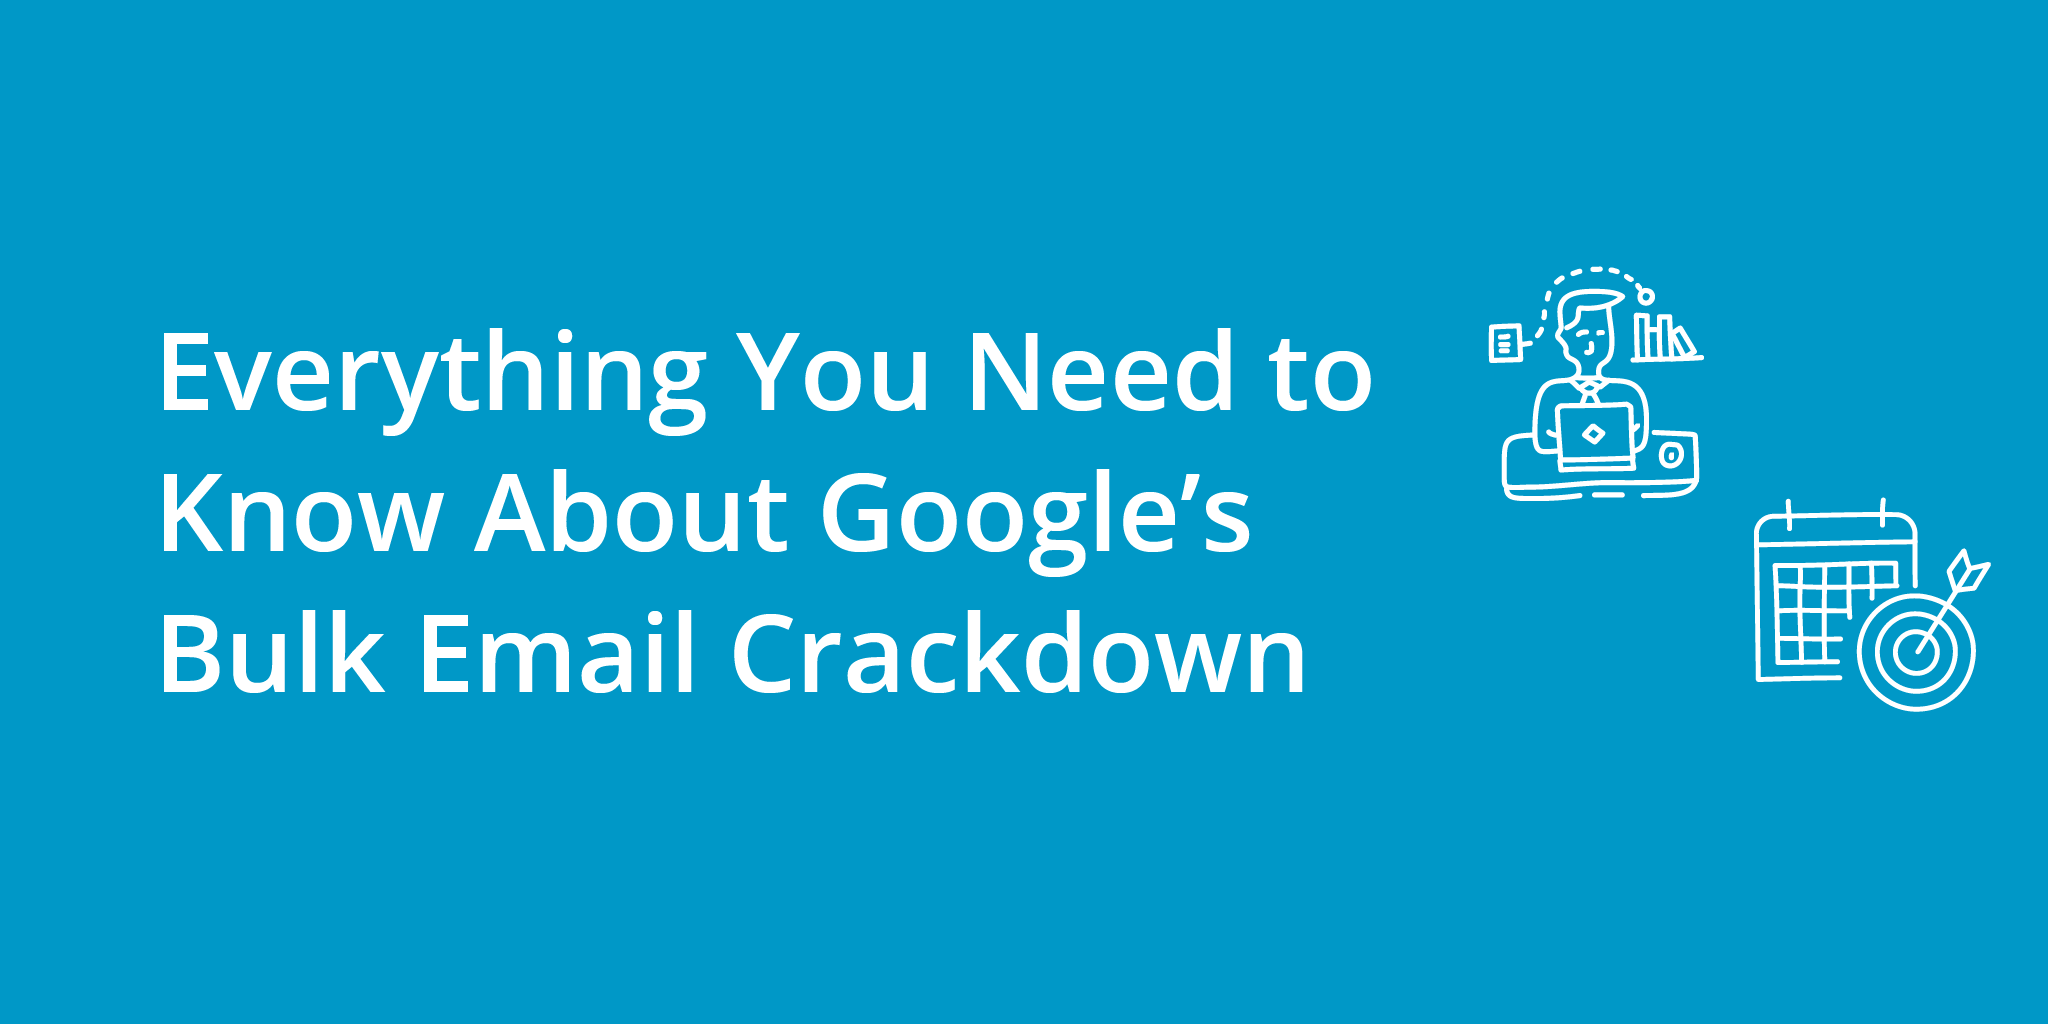 Everything You Need to Know About Google’s Bulk Email Crackdown